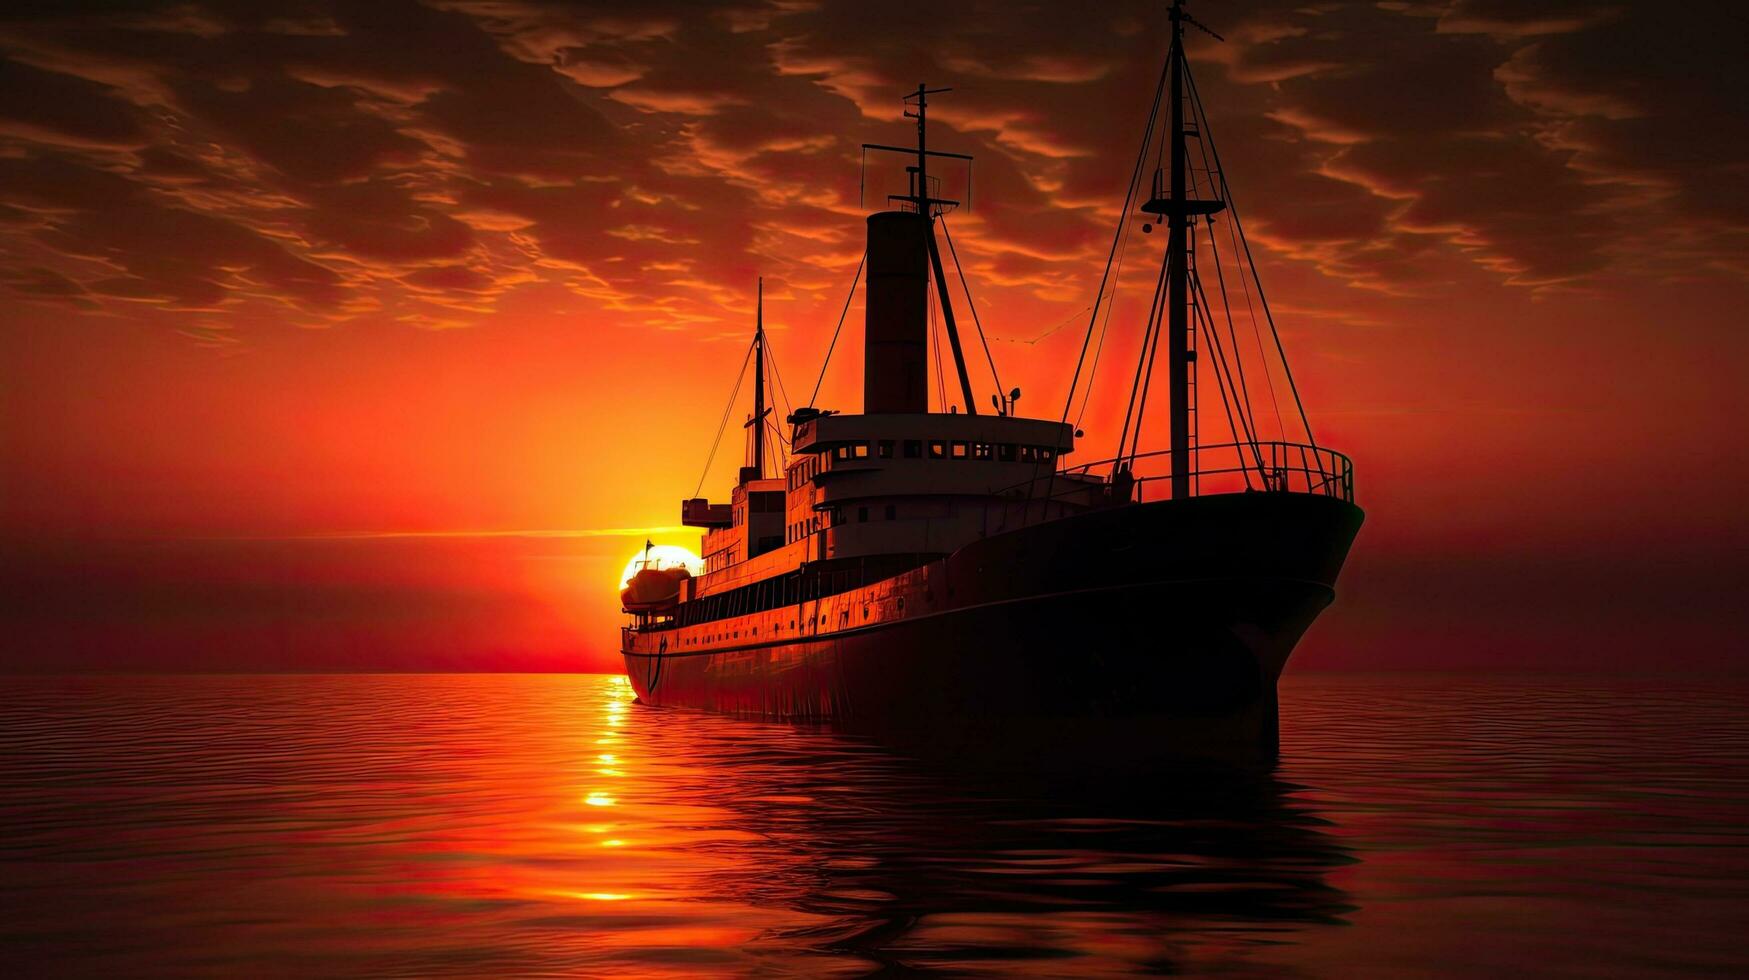 a ship silhouette during sunset photo